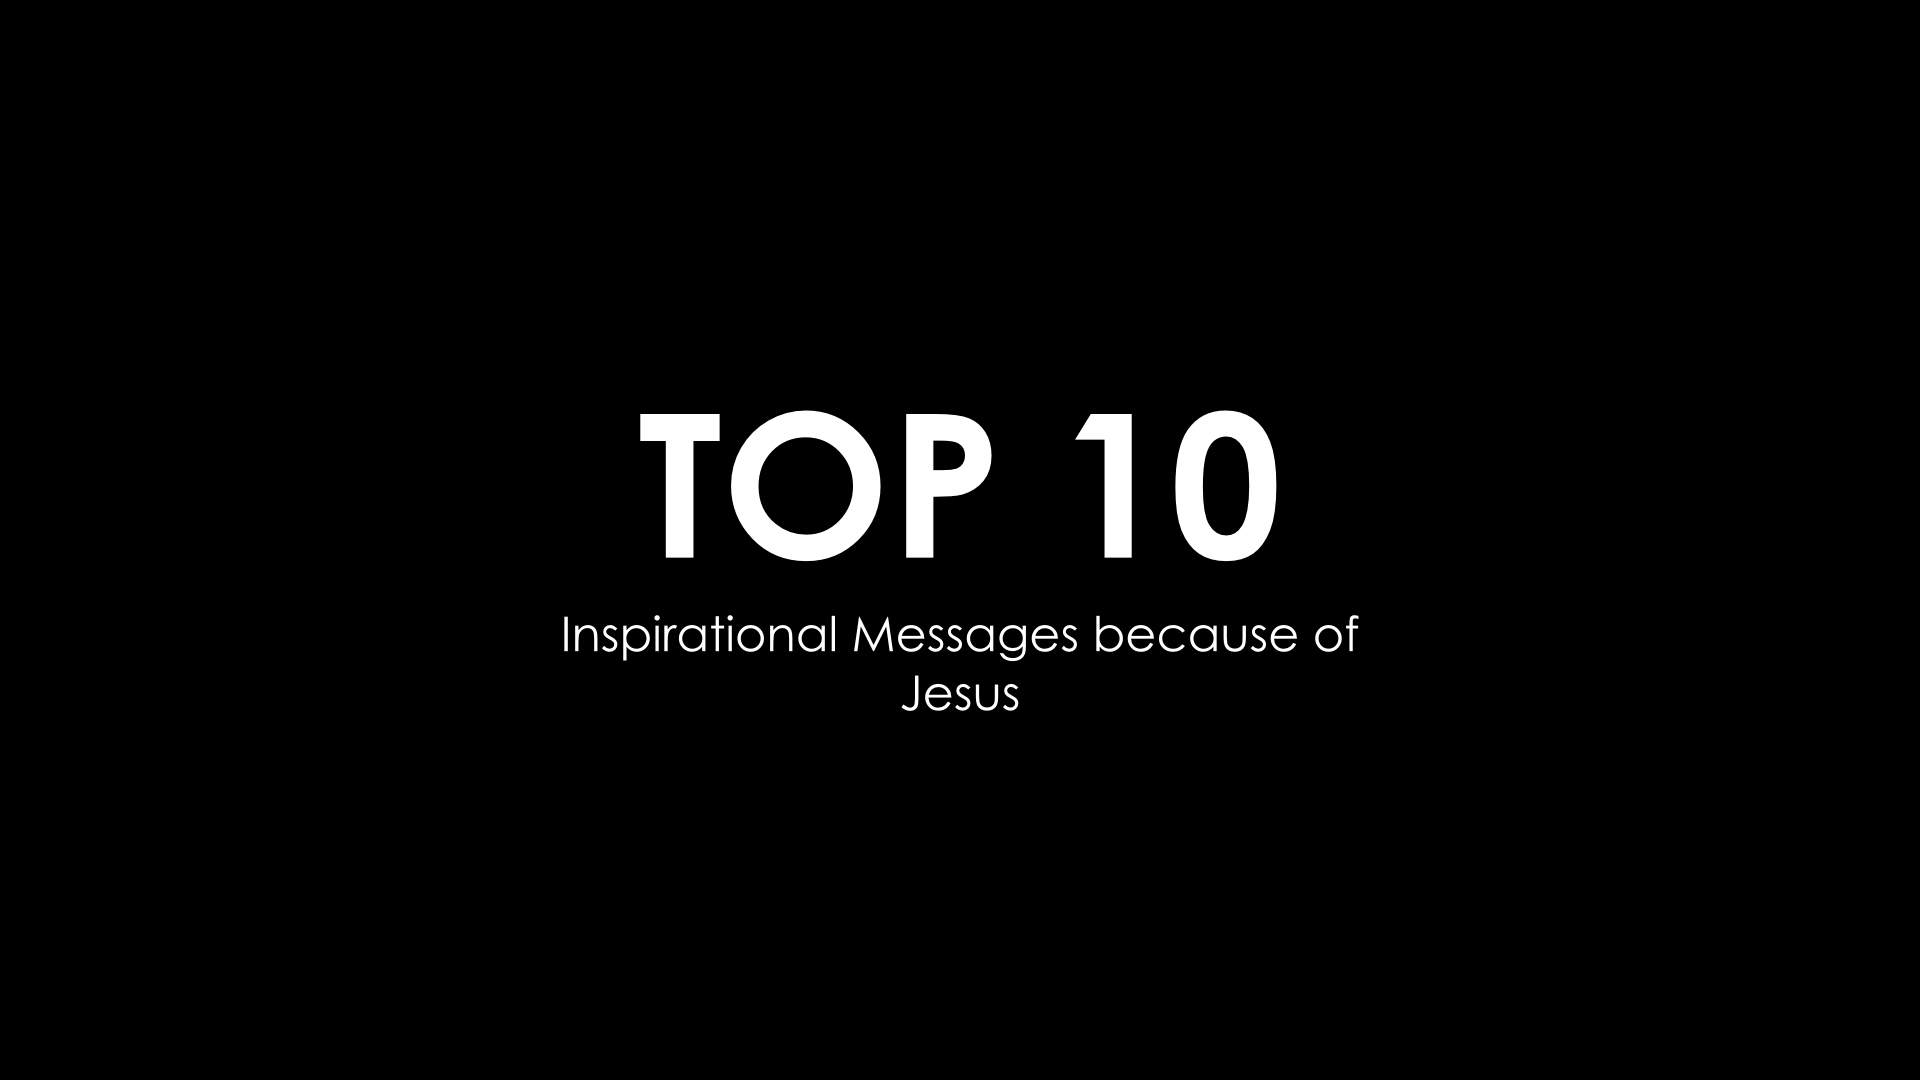 TOP 10 INSPIRATIONAL Messages because of Jesus